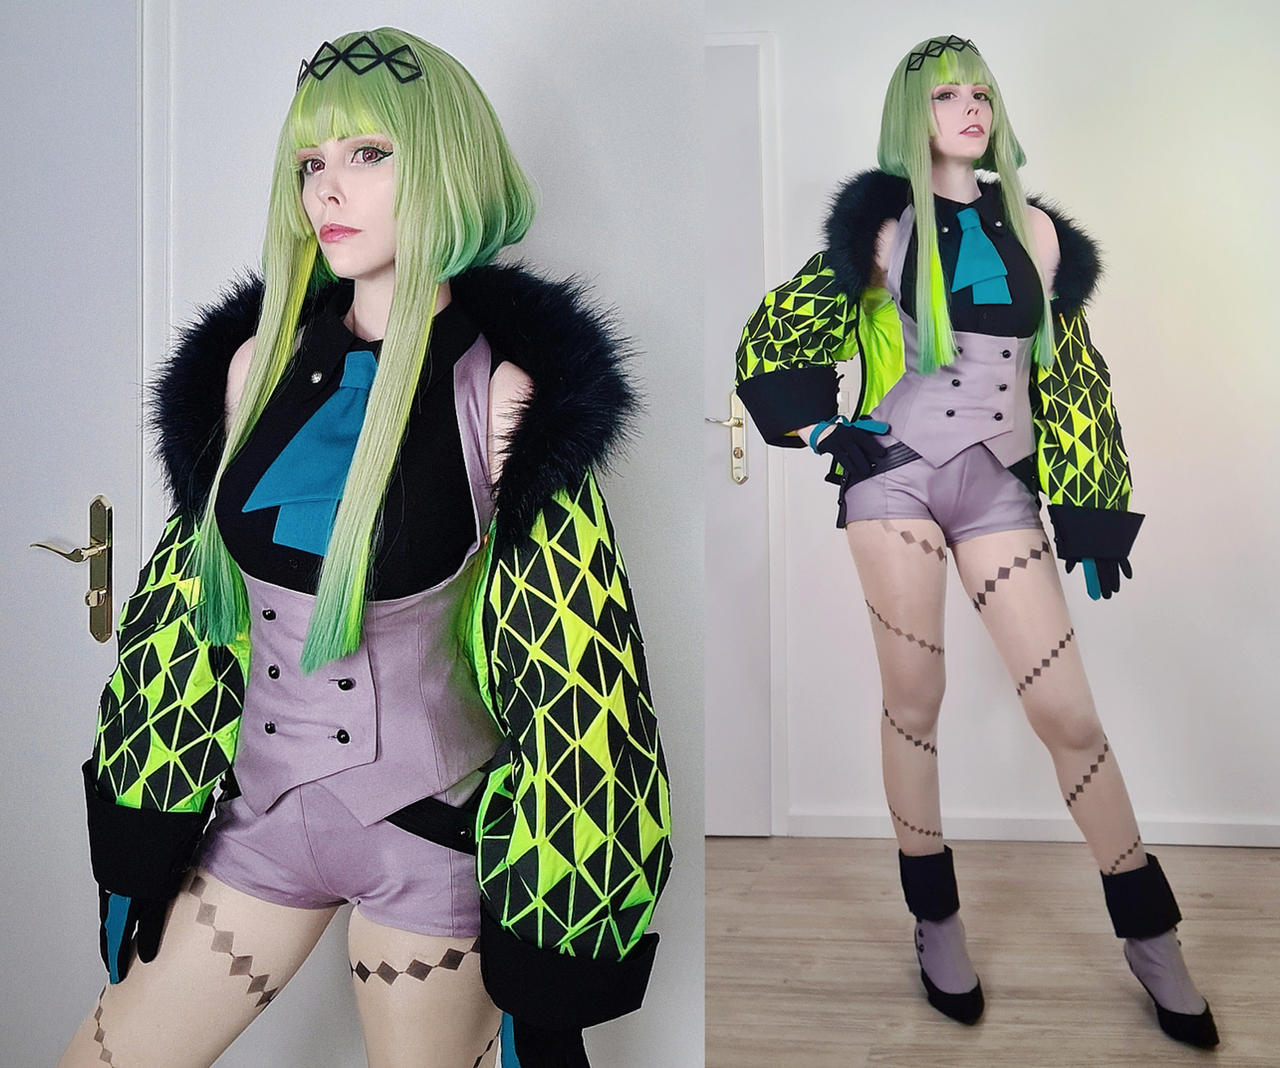 Ringo - Soul Hackers 2 - Cosplay by Calssara on DeviantArt